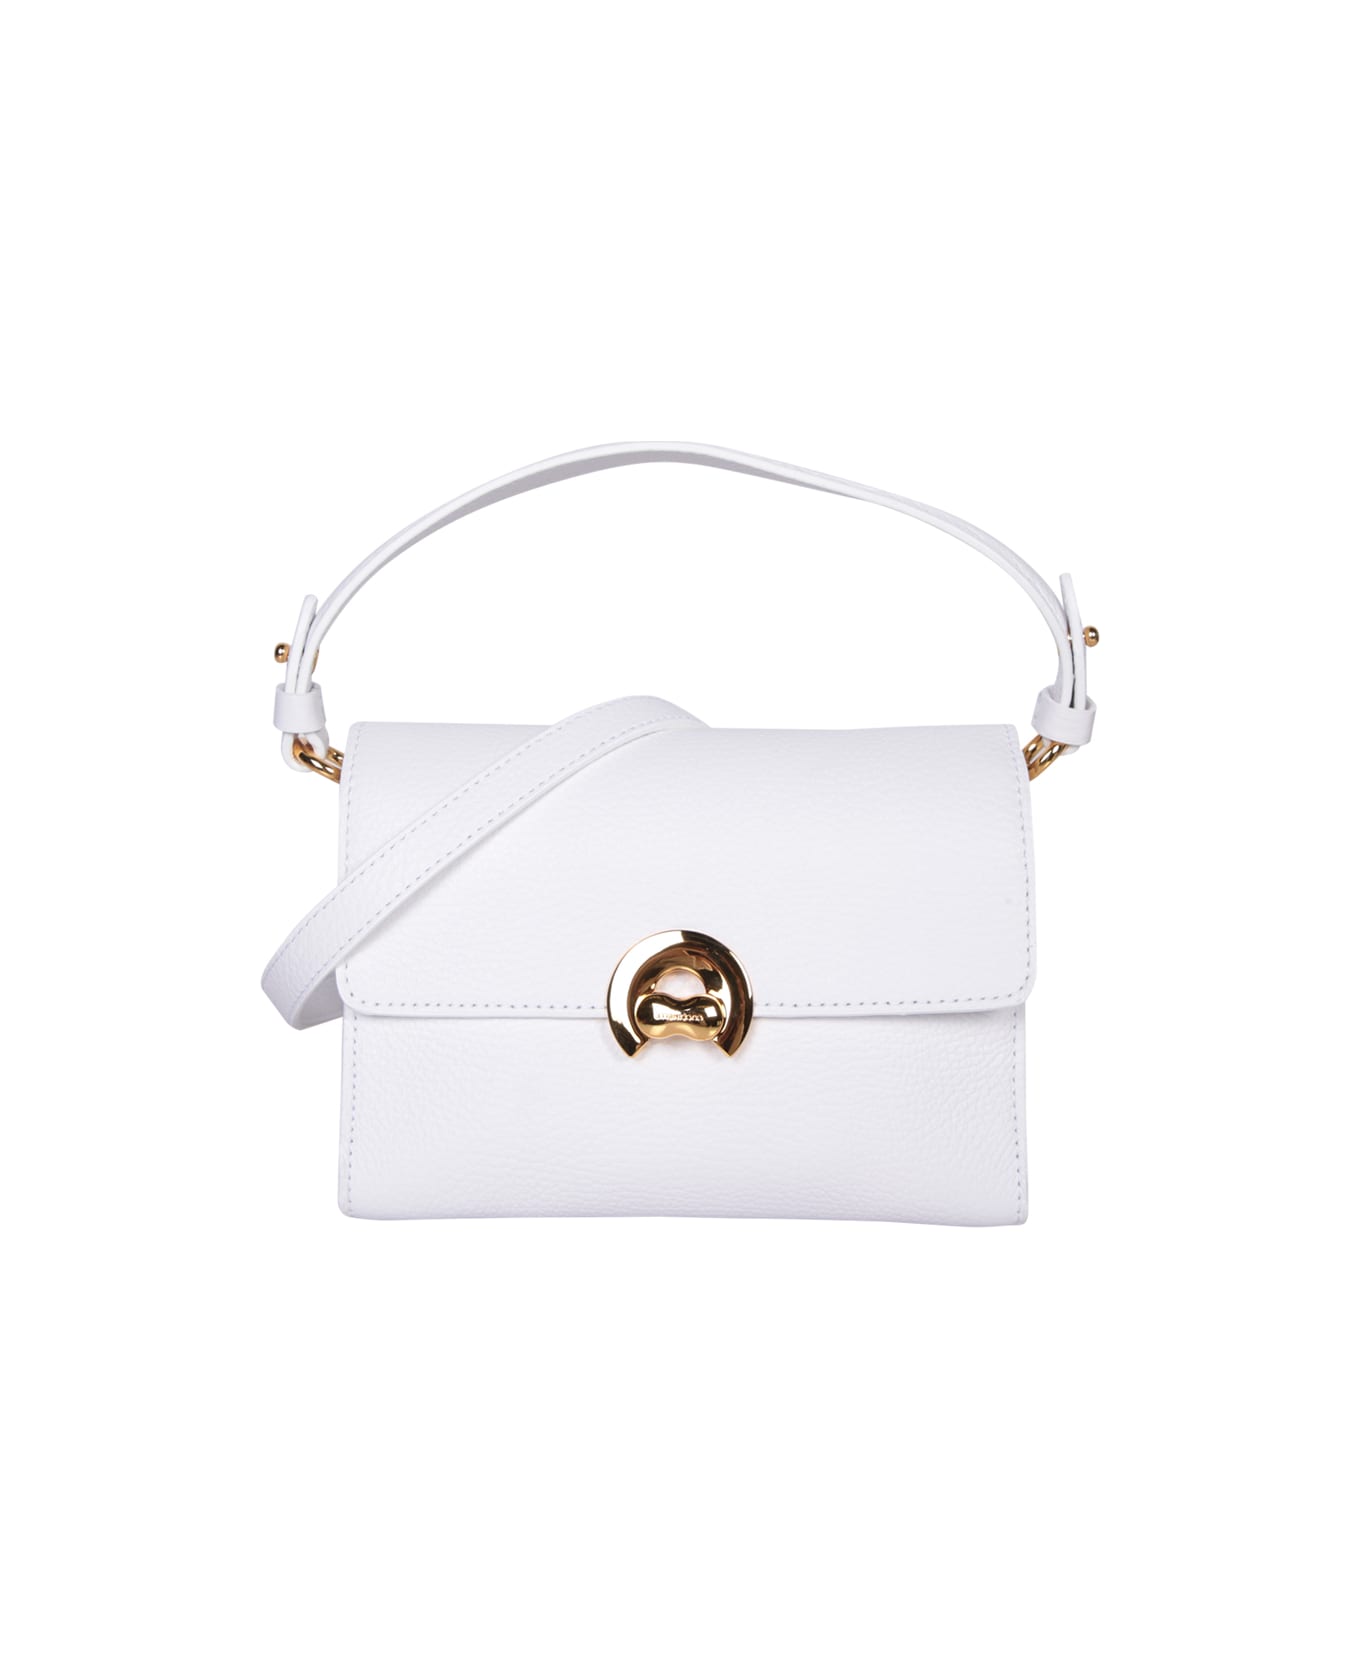 Coccinelle Arlettis Mini Gold And White Bag - Metallic トートバッグ